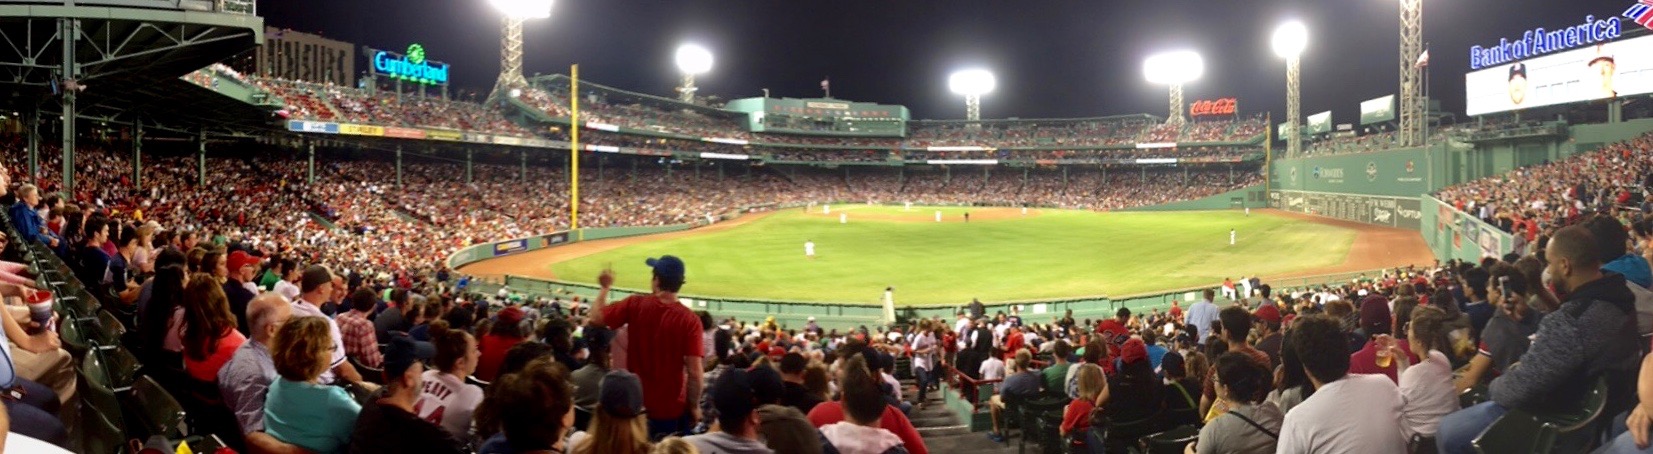 Fenway Park Stadium, from the cheap seats